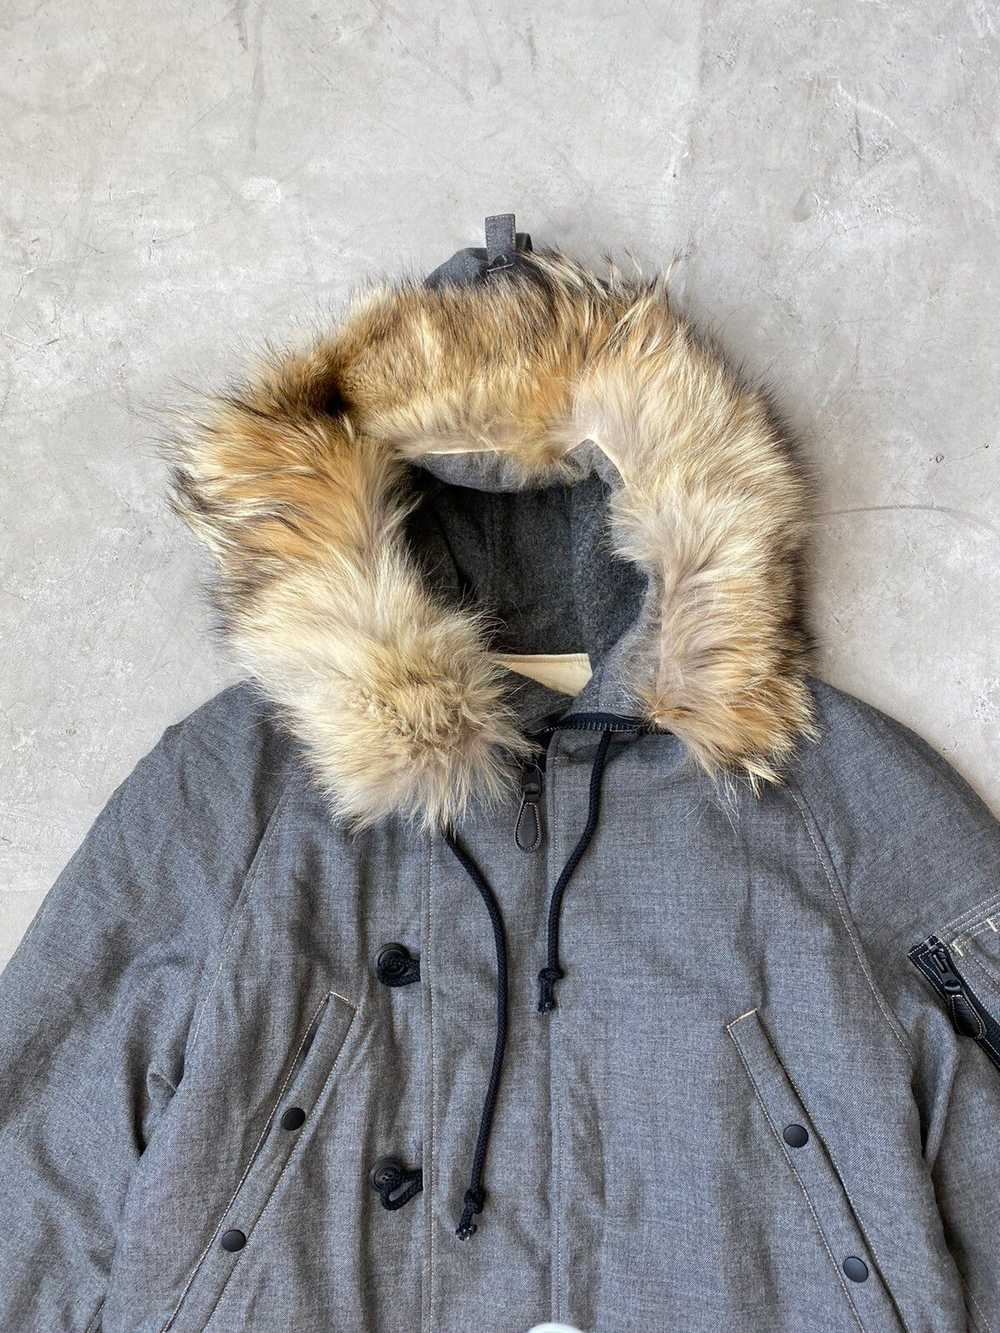 General Research FW/97 General Research Wool Parka - image 2